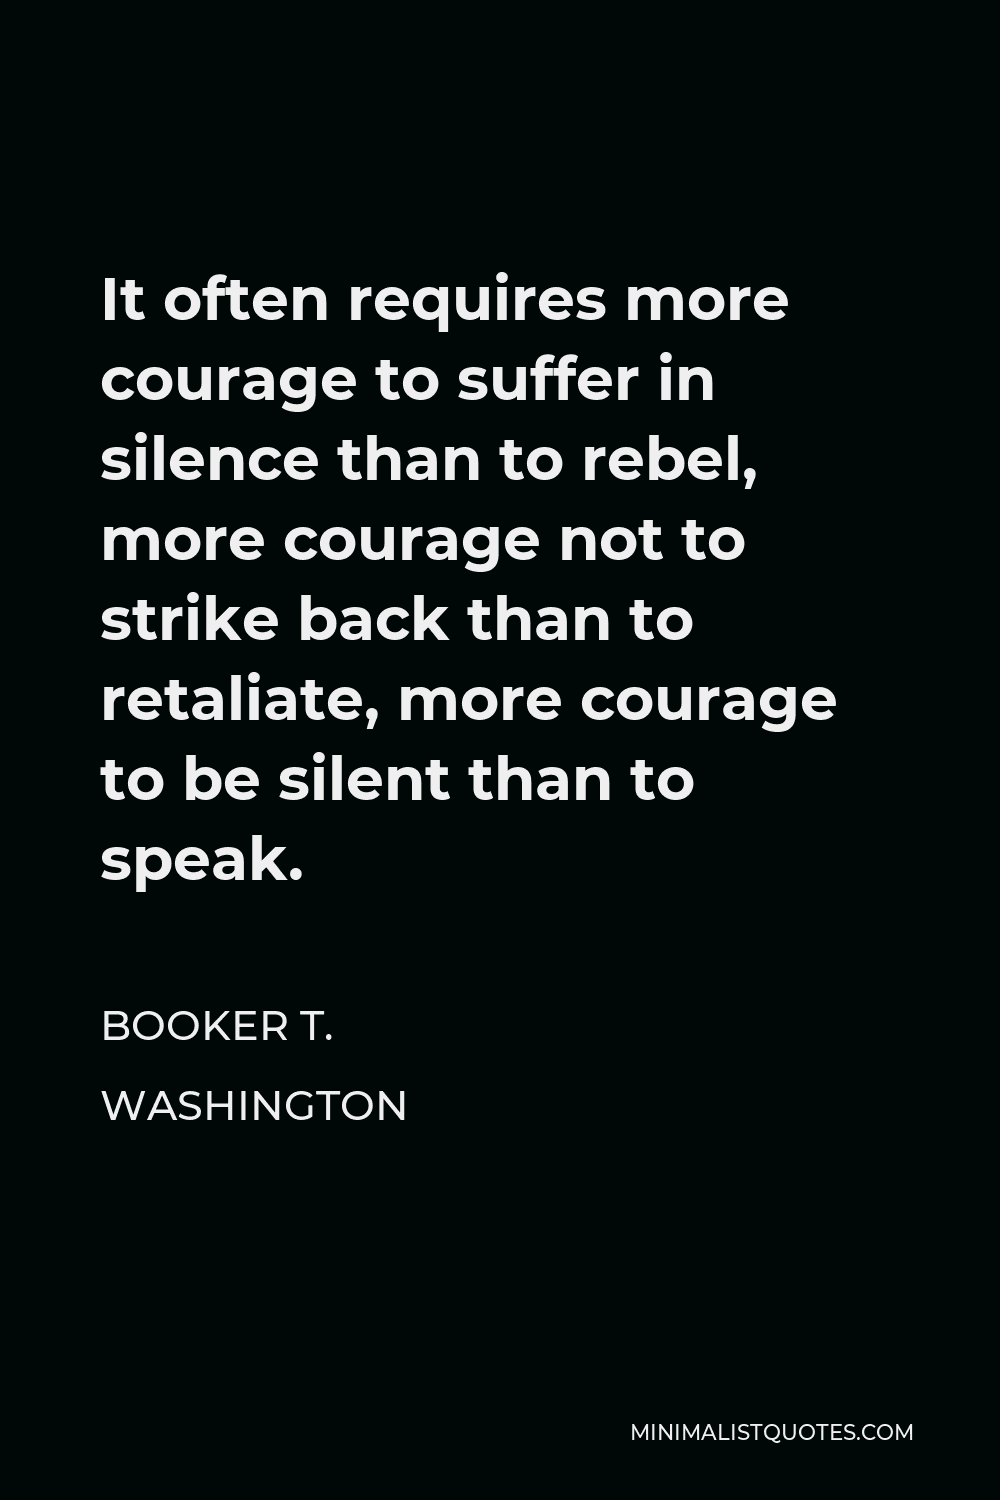 Booker T. Washington Quote - It often requires more courage to suffer in silence than to rebel, more courage not to strike back than to retaliate, more courage to be silent than to speak.